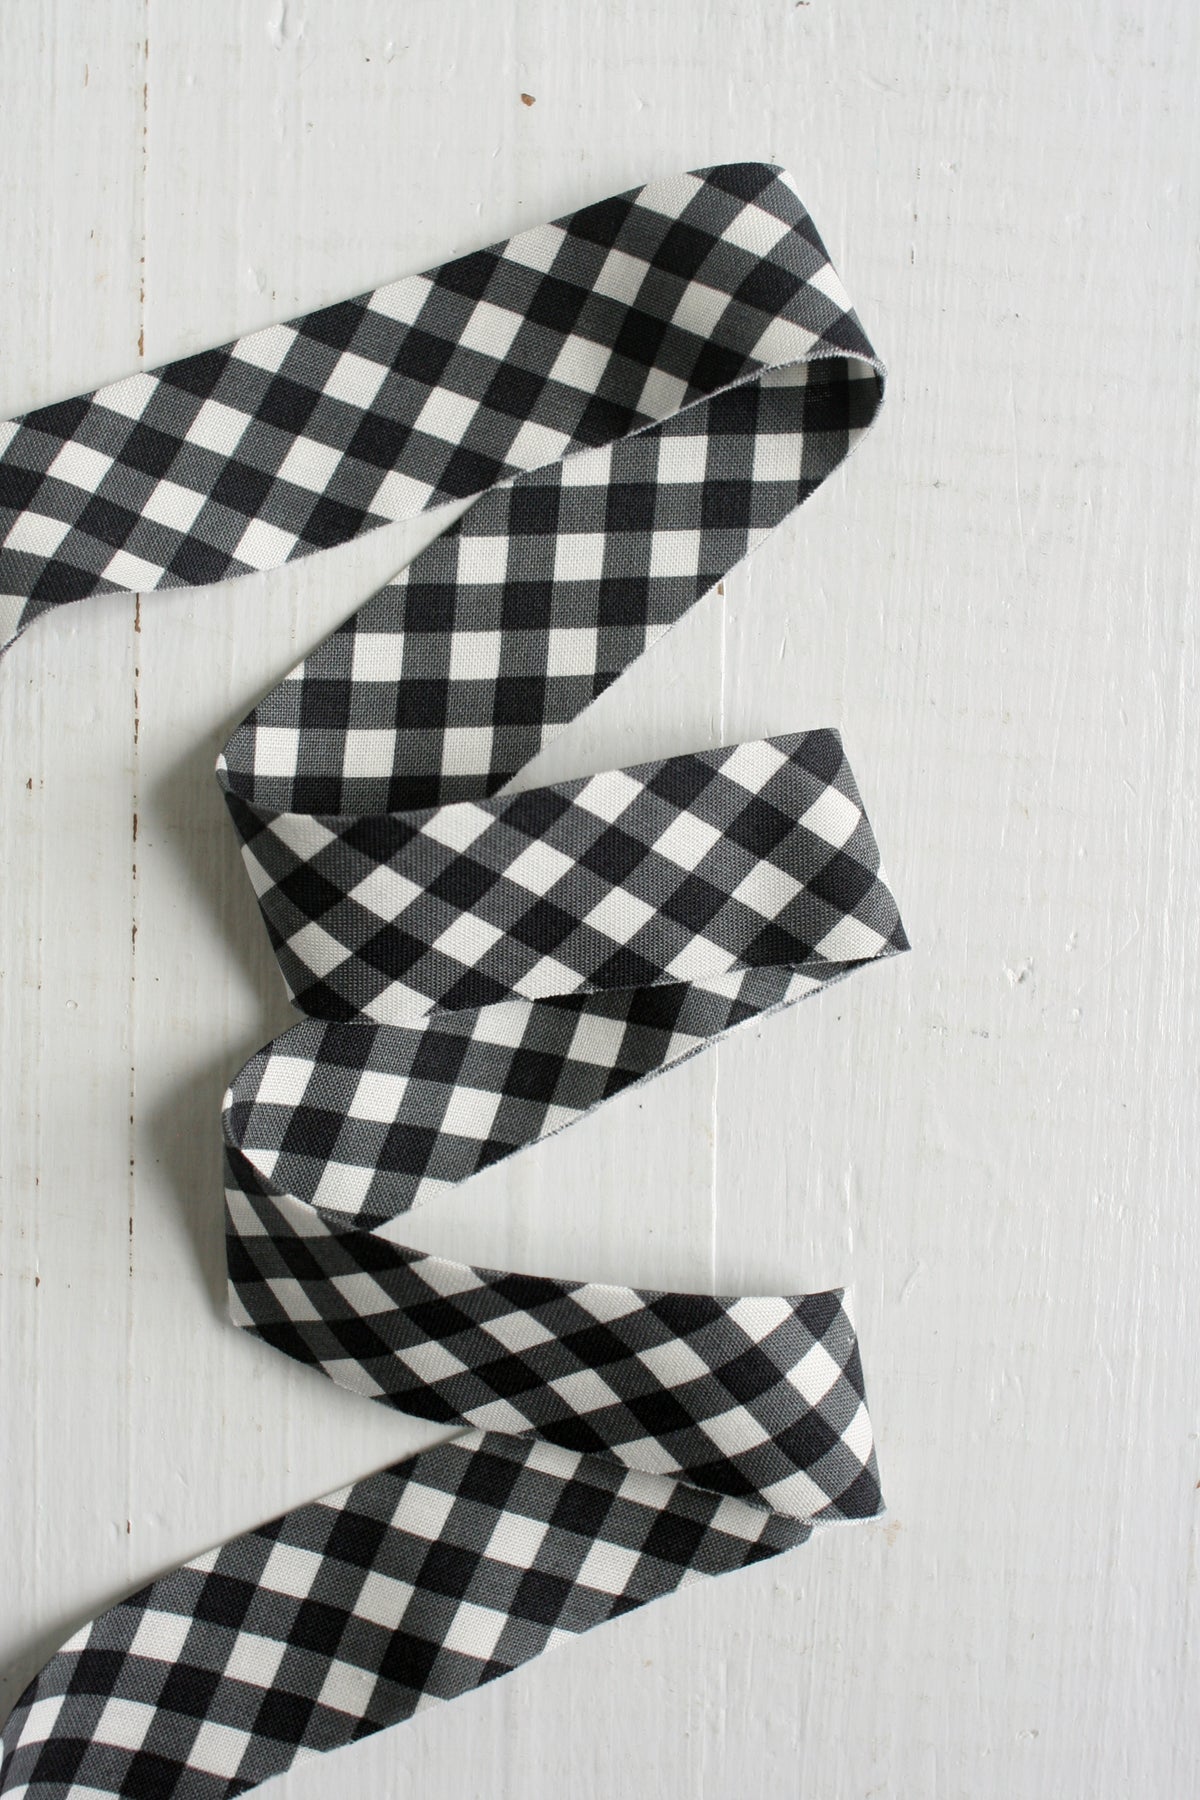 SALE Black and White Gingham - 1/2&quot; bias 3 yards